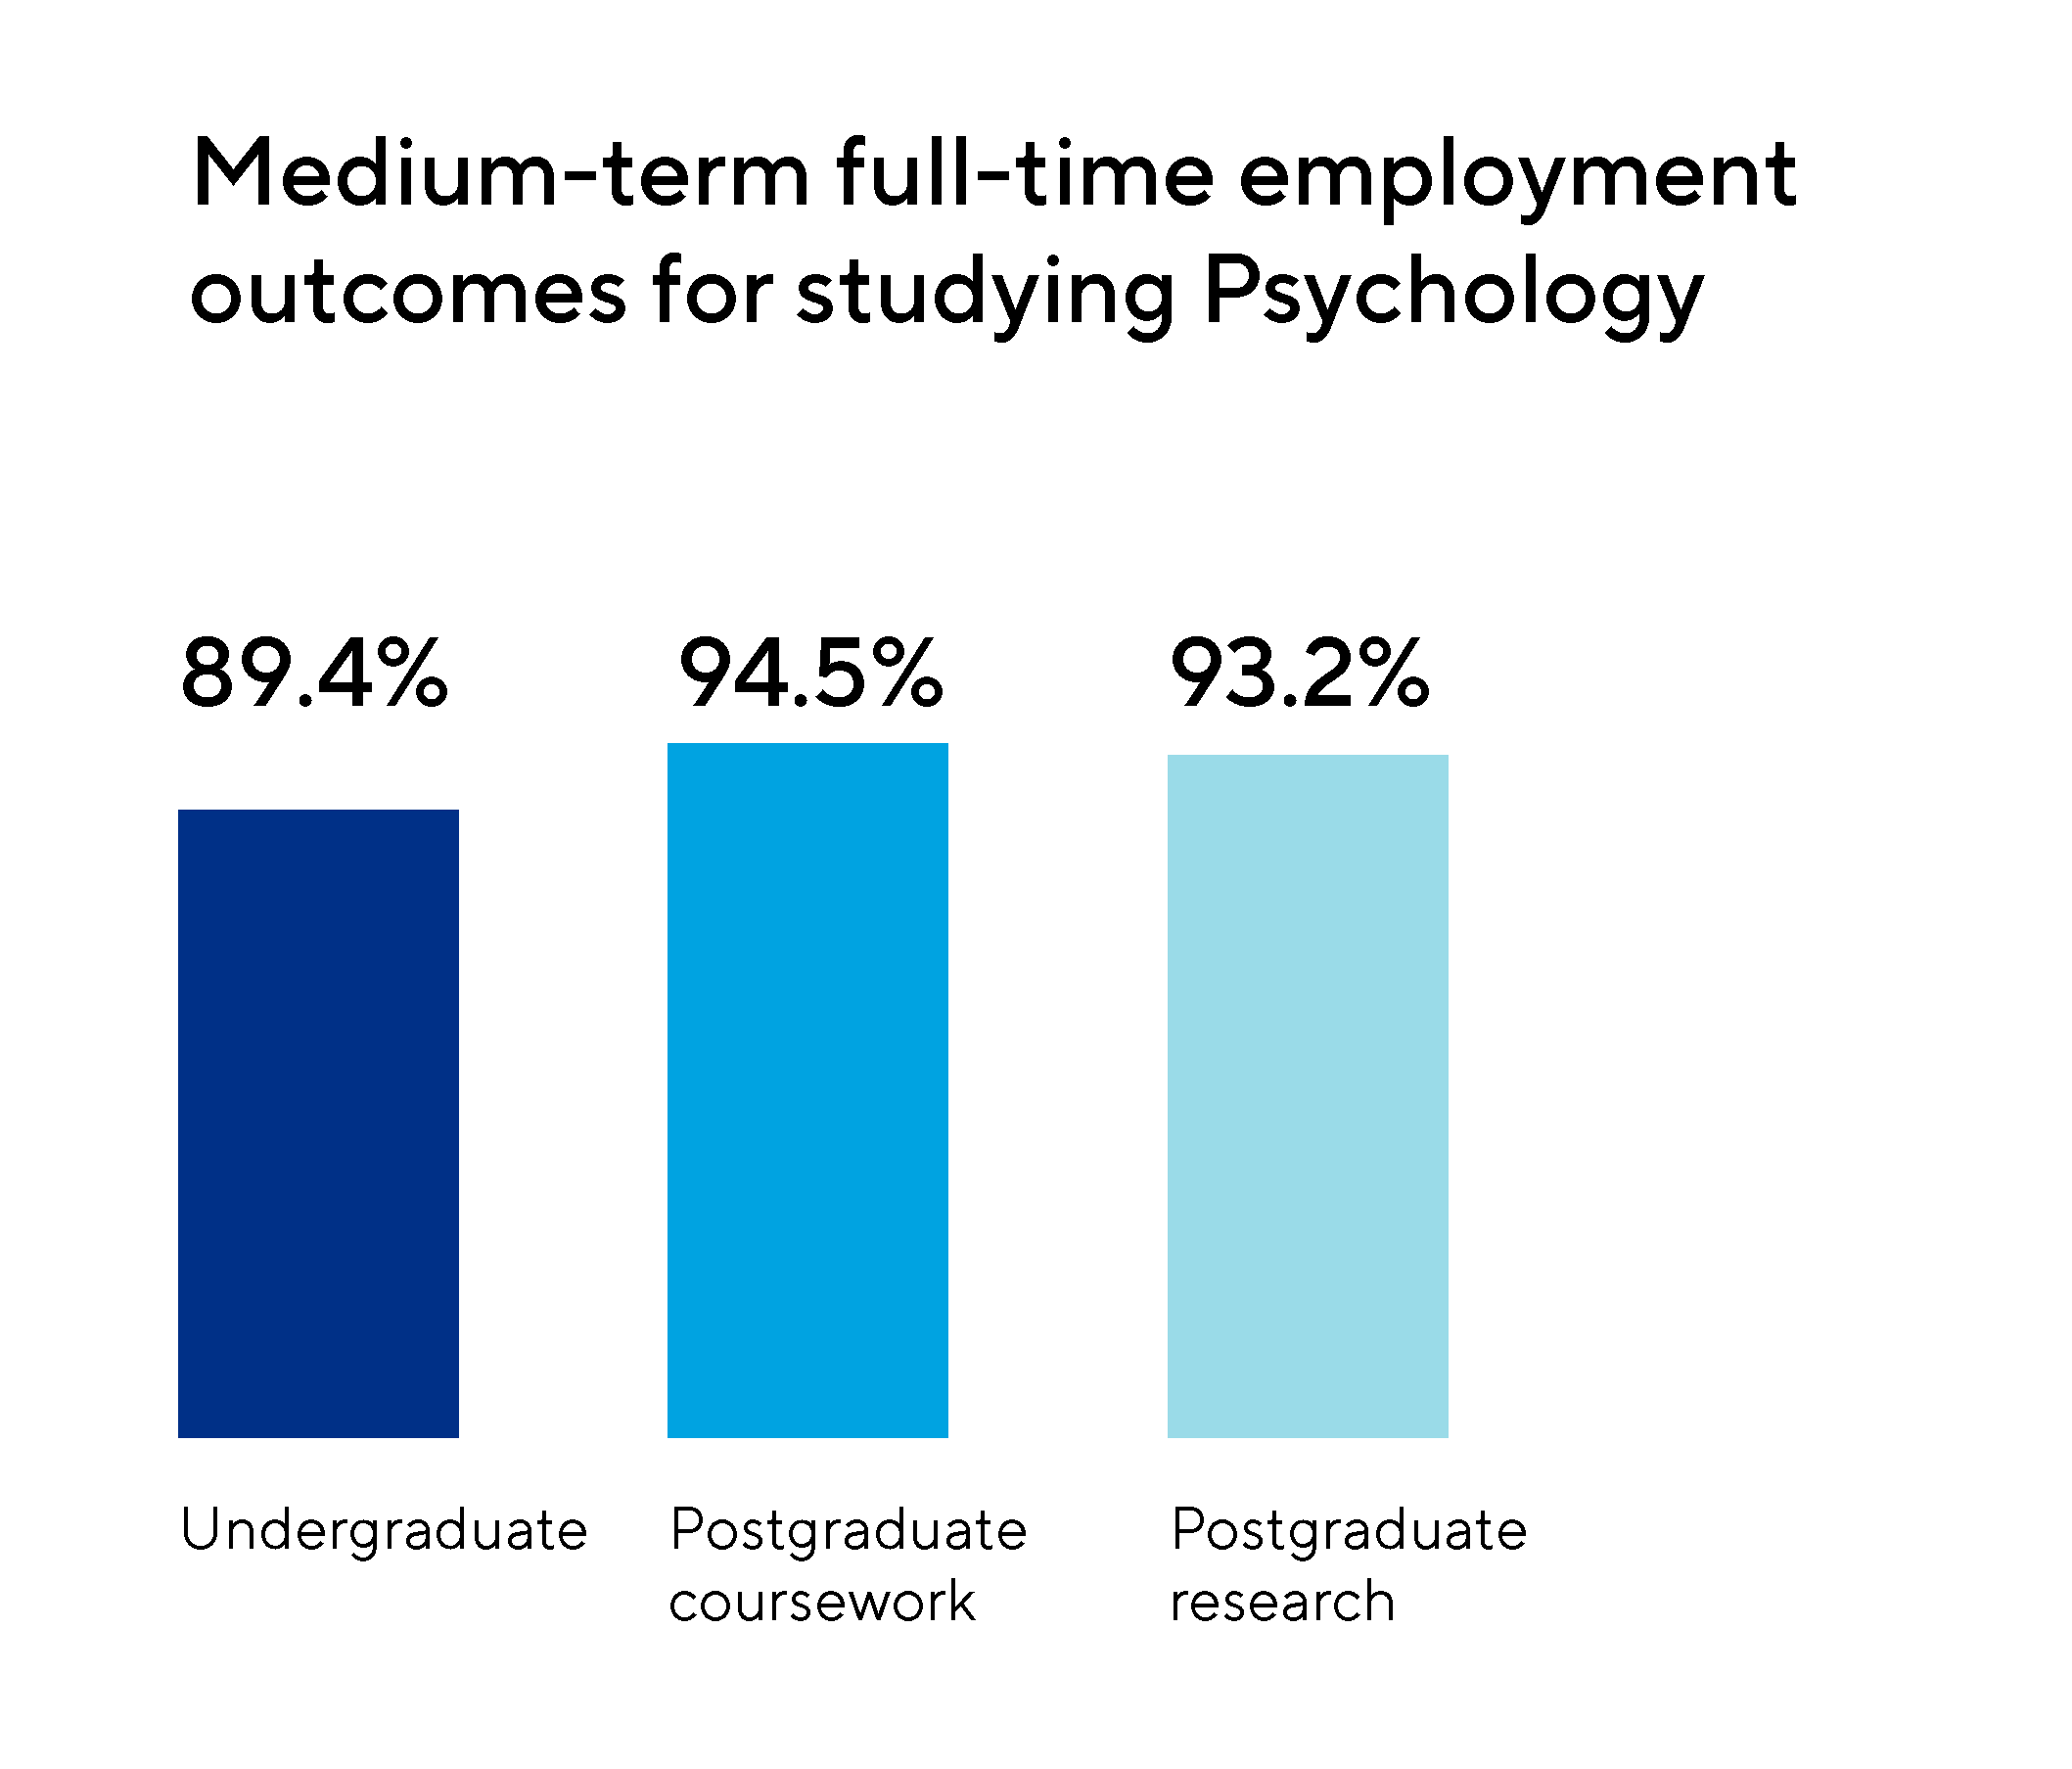 Image of the medium-term full-term employment outcomes for studying psychology, with 89.4% being allocated to Undergraduates, 94.5% being allocated to postgraduate course and 93.2% being allocated to postgraduate research.